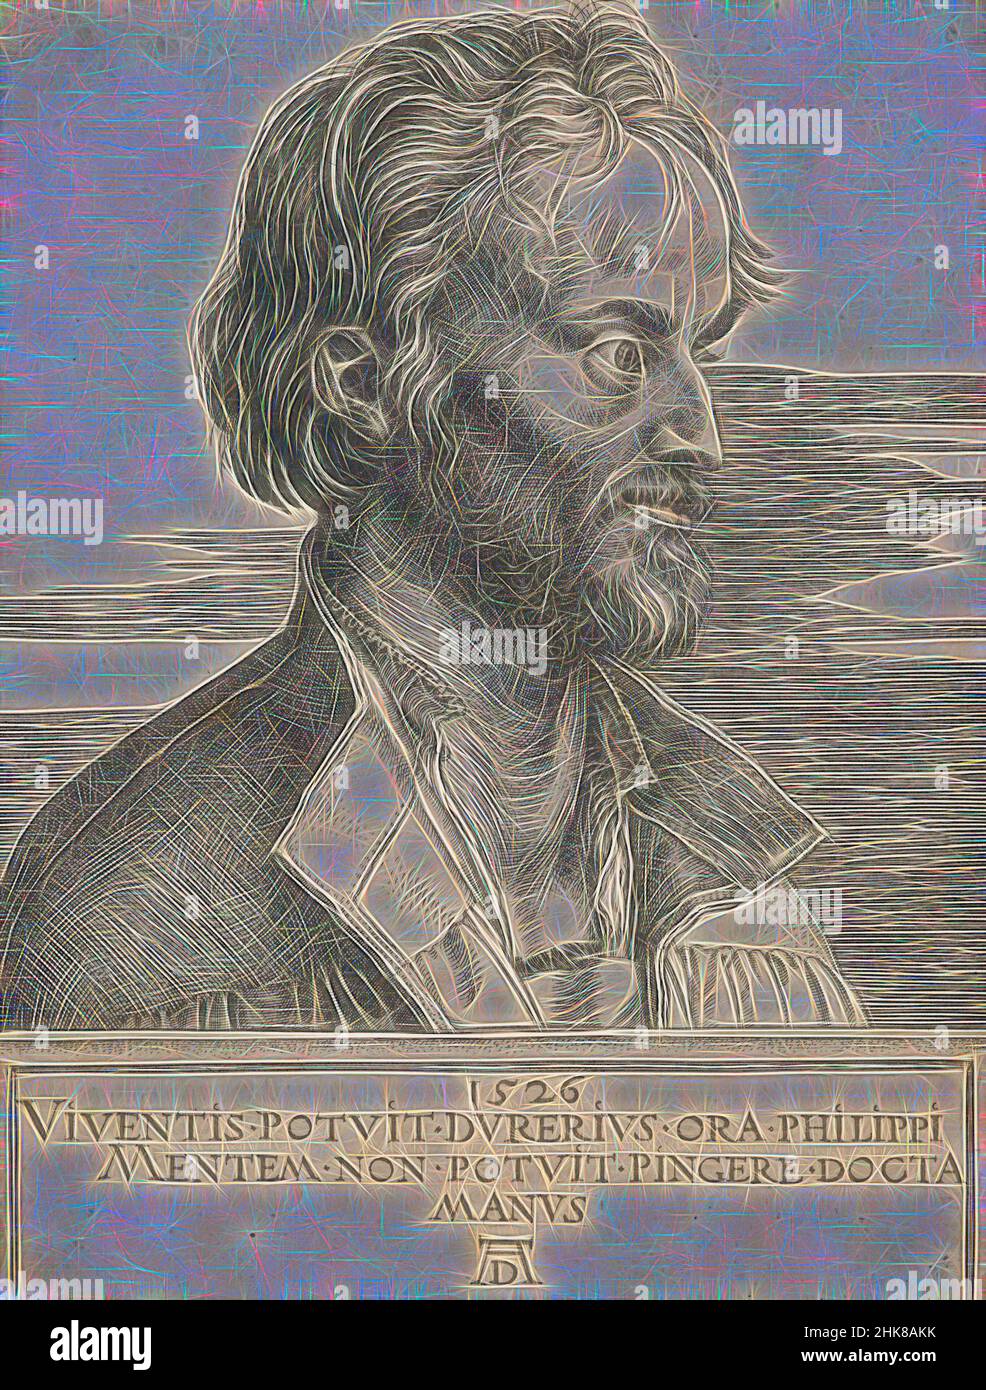 Inspired by Philipp Melanchthon., Albrecht Dürer, artist, 1526, Germany, engraving, Philip Melanchthon (1497-1560) was a leading figure of the Protestant Reformation in Germany, Reimagined by Artotop. Classic art reinvented with a modern twist. Design of warm cheerful glowing of brightness and light ray radiance. Photography inspired by surrealism and futurism, embracing dynamic energy of modern technology, movement, speed and revolutionize culture Stock Photo